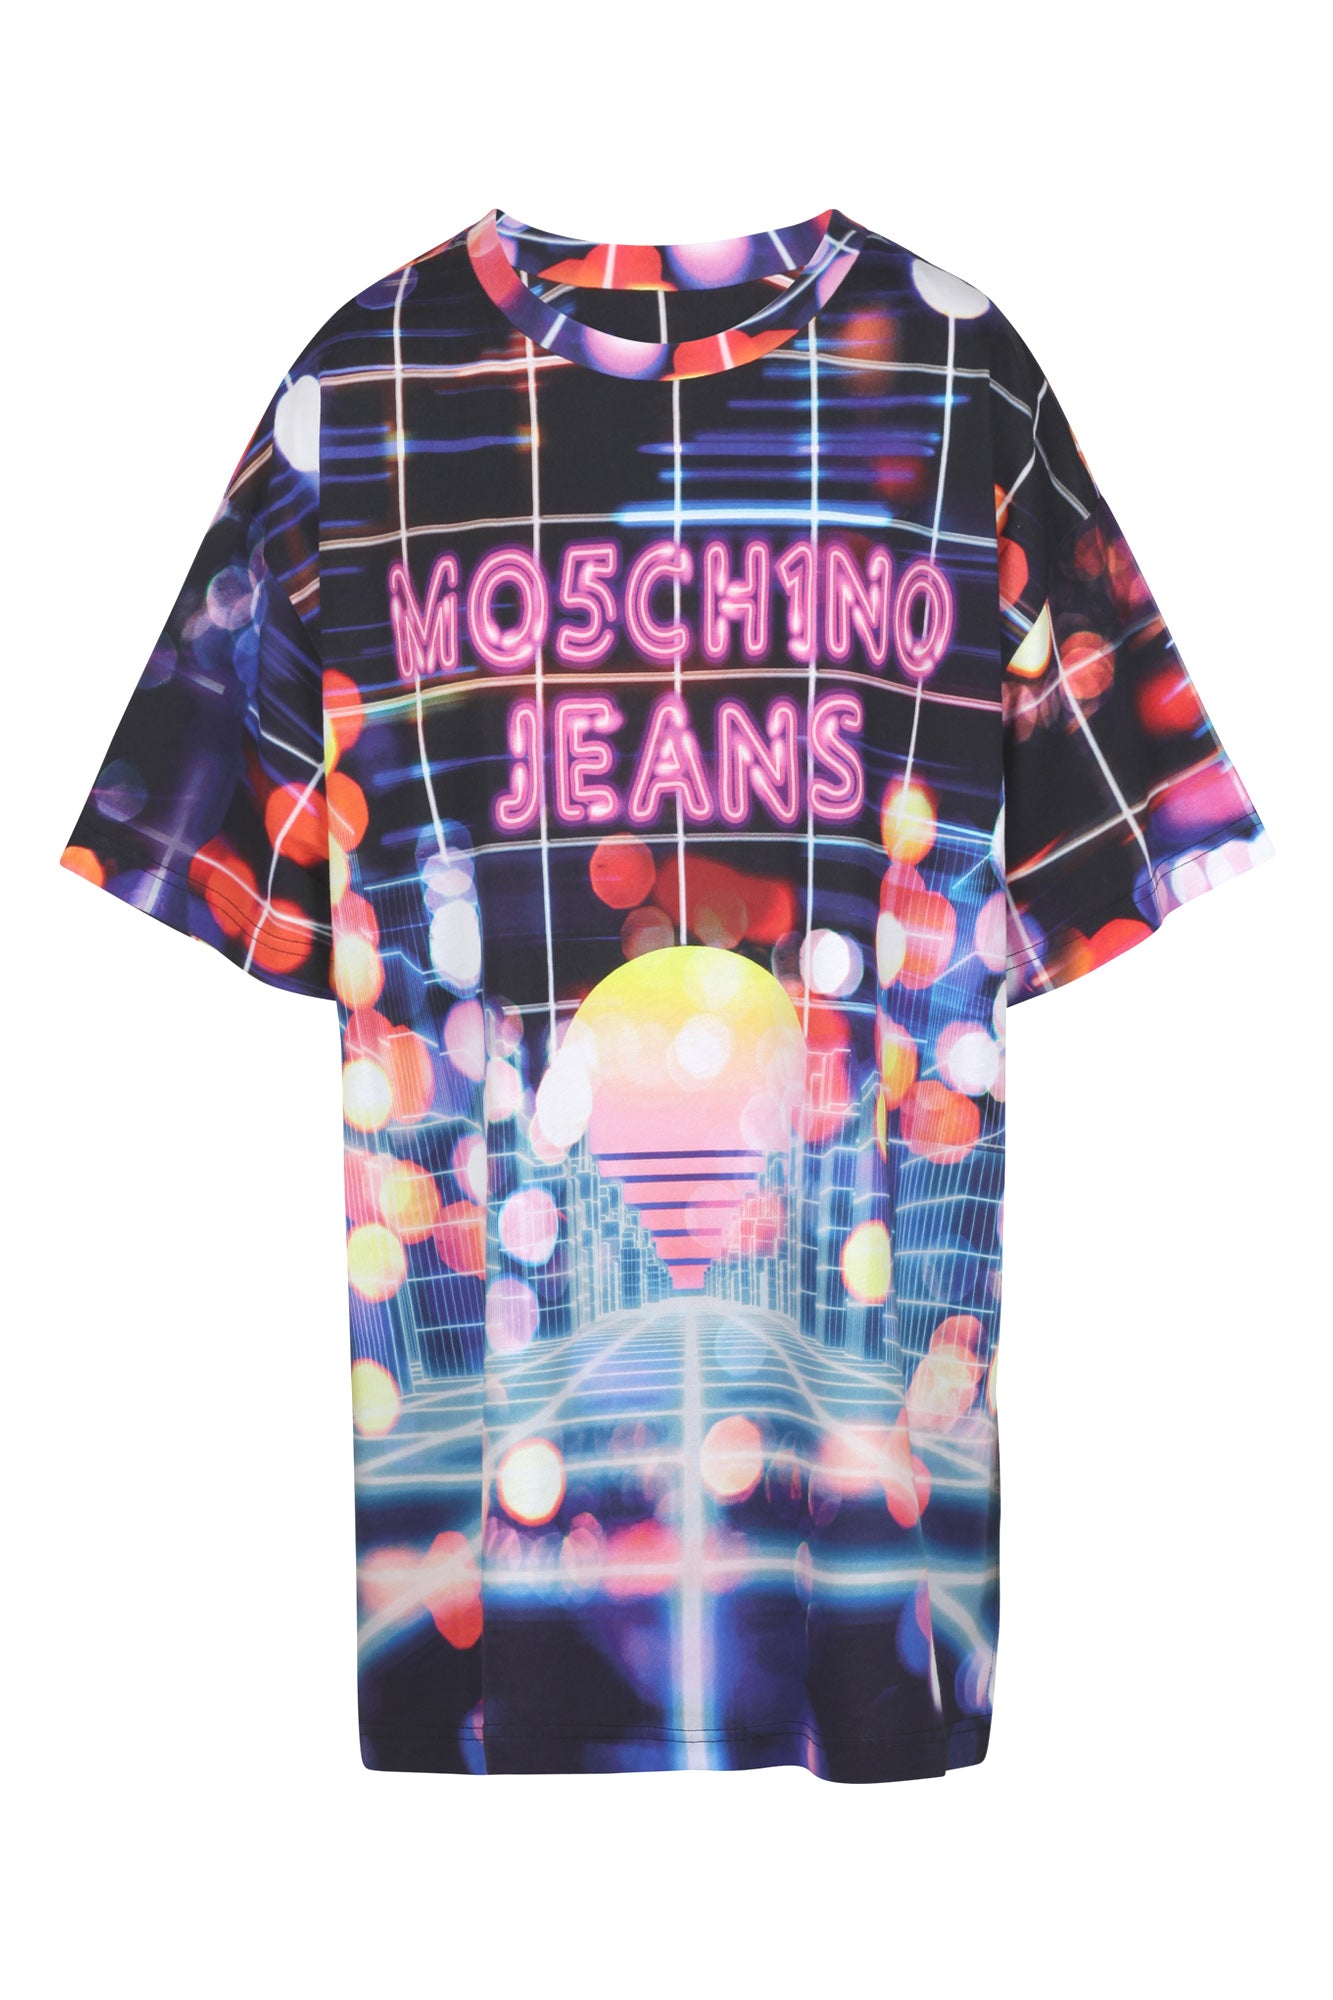 MO5CH1NO JEANS - Moschino - T-shirt - 421600 - Multicolor